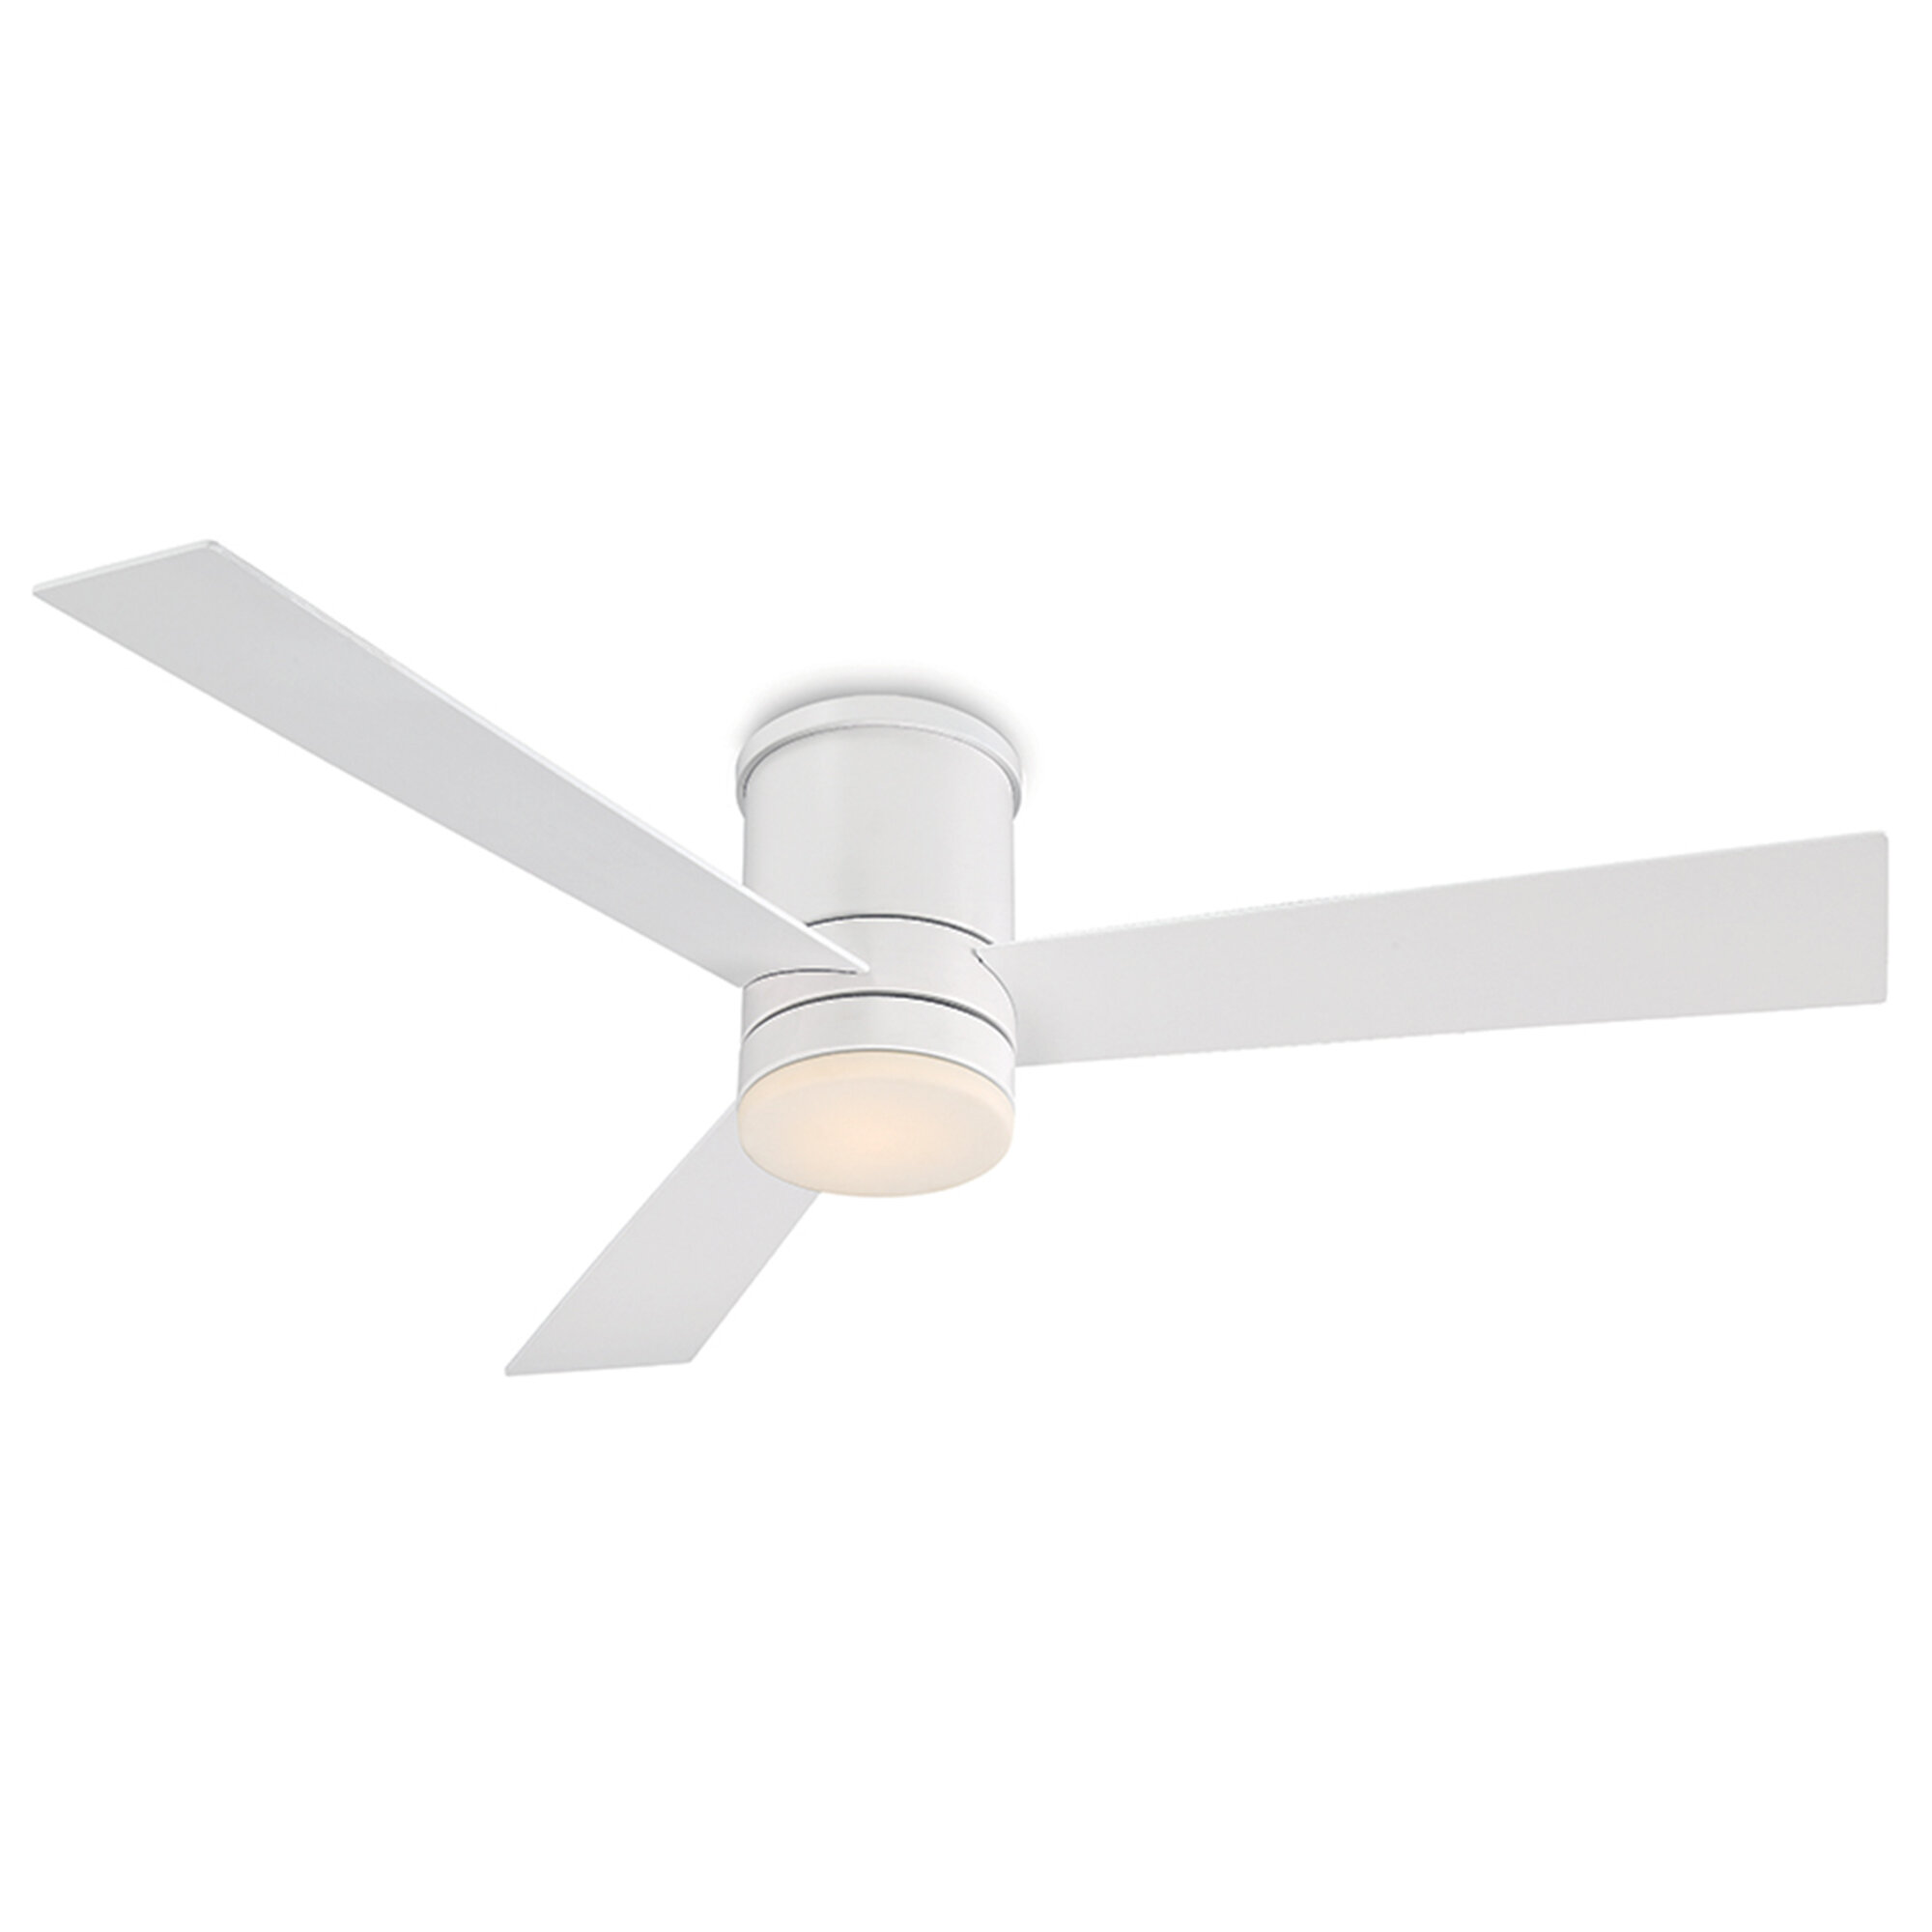 Modern Forms 52 Axis 3 Blade Outdoor Led Smart Flush Mount Ceiling Fan With Remote Control And Light Kit Included Reviews Wayfair